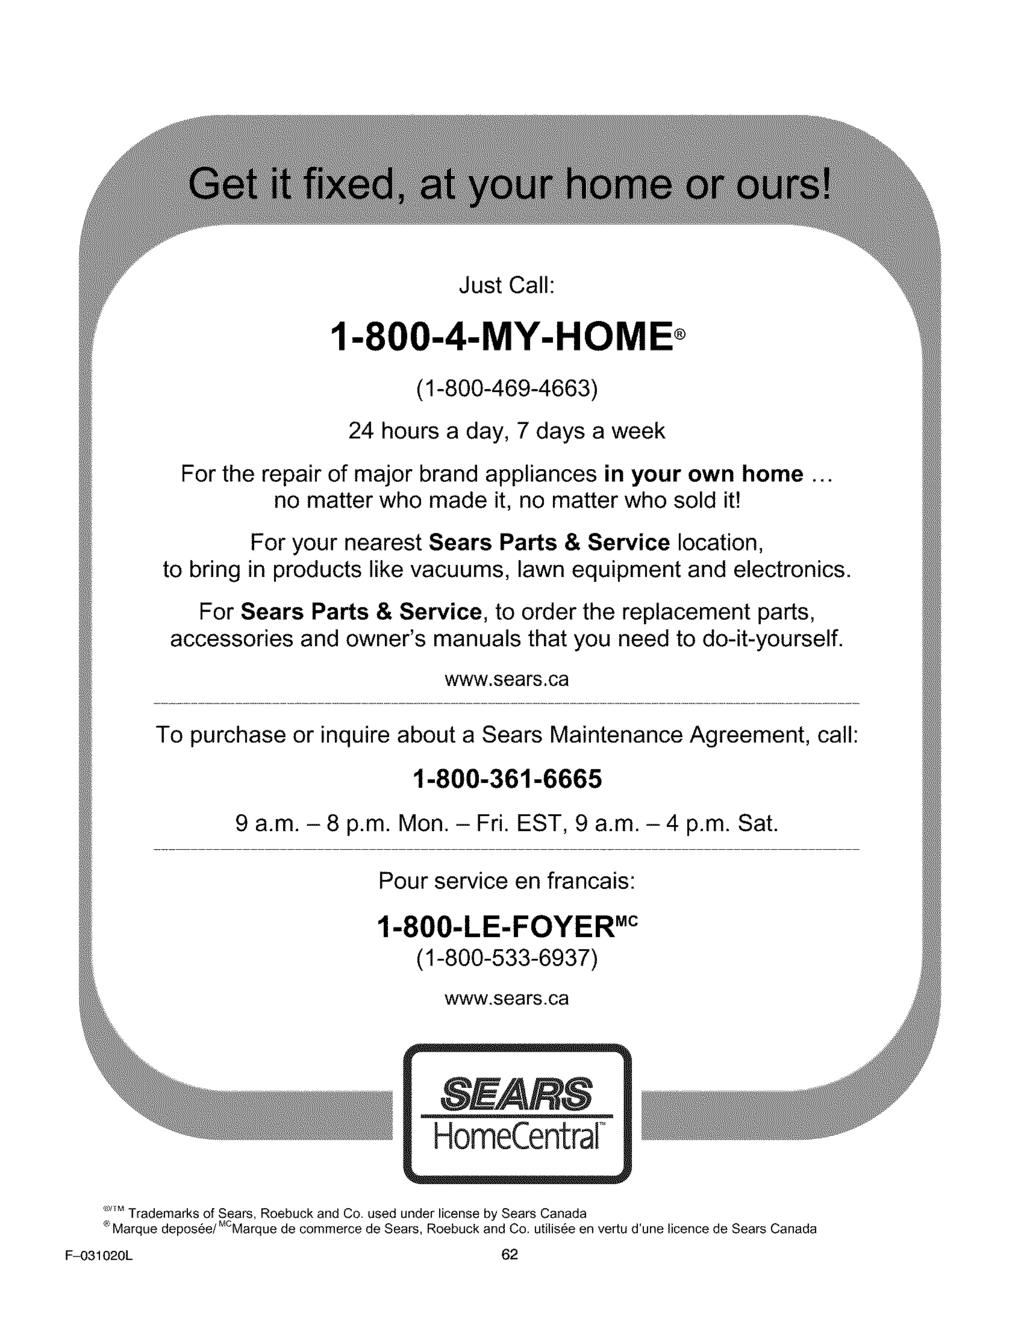 Just Call: 1-800-4-MY-HOME (1-800-469-4663) 24 hours a day, 7 days a week For the repair of major brand appliances in your own home... no matter who made it, no matter who sold it!